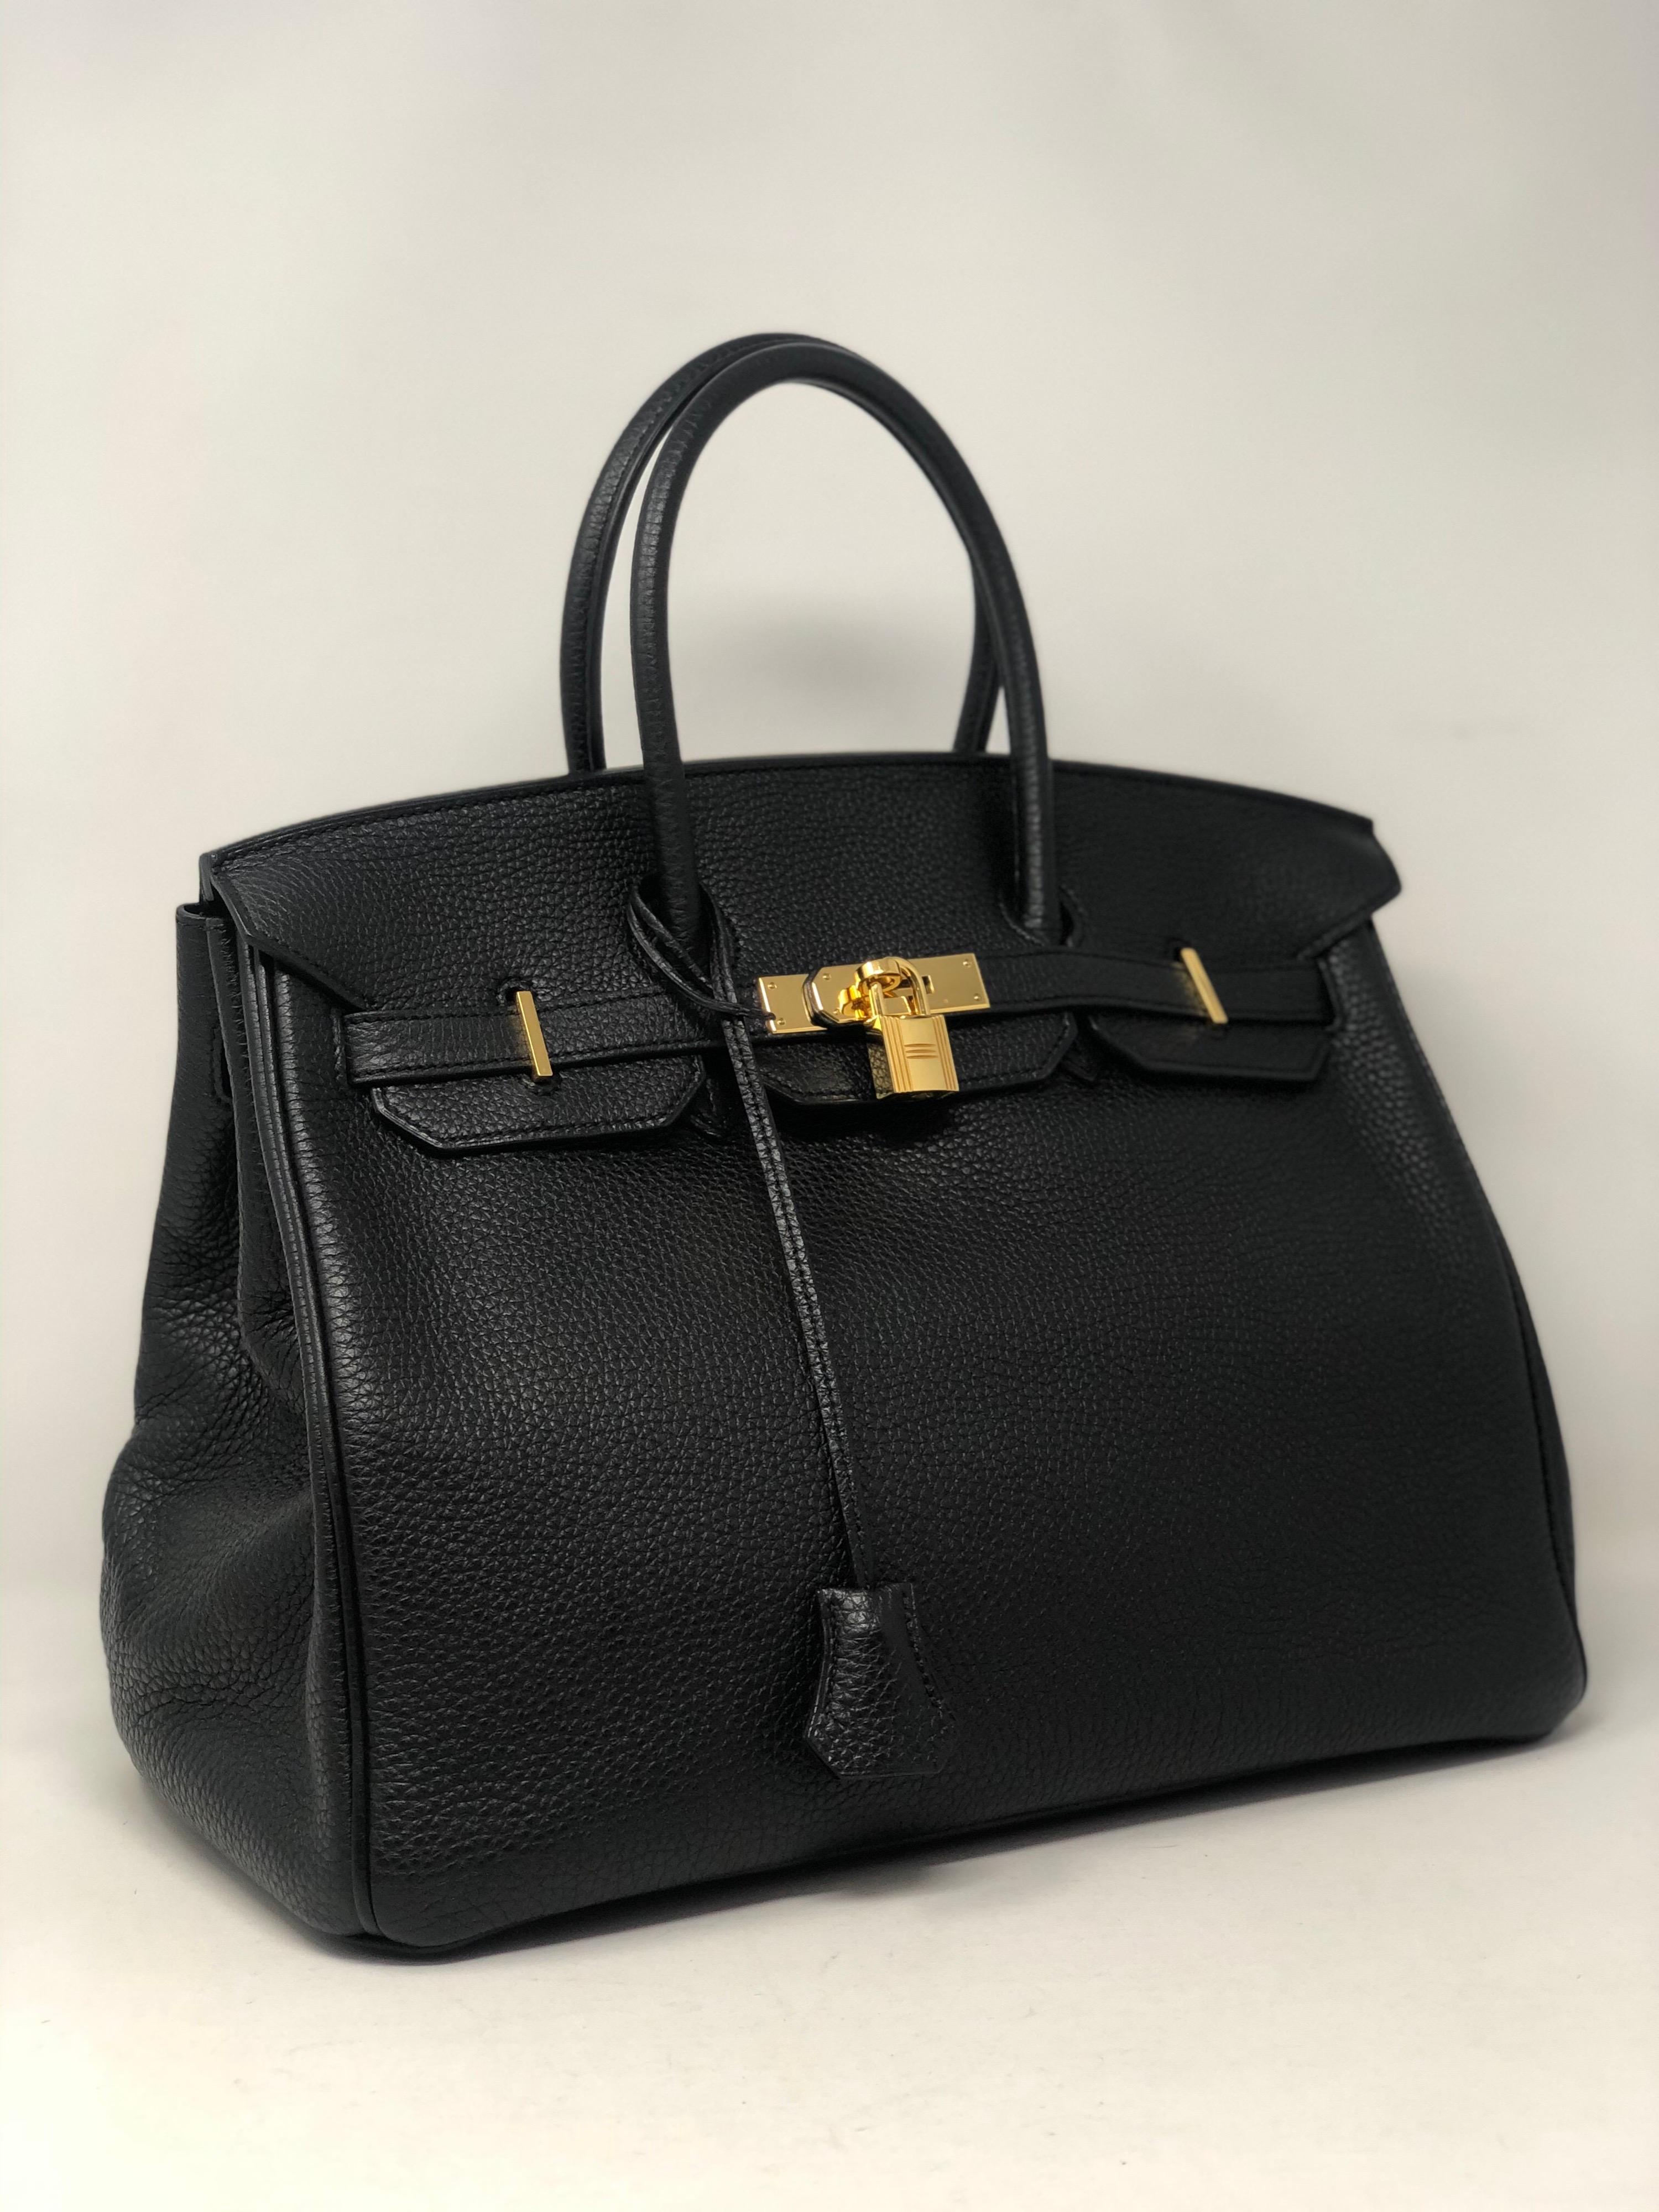 Hermes Black Birkin 35. Gold hardware. M square stamp. From 2009. Excellent condition. Most sought after black with gold hardware. Don't miss out. Includes clochette, lock, keys, and dust cover. Guaranteed authentic. 